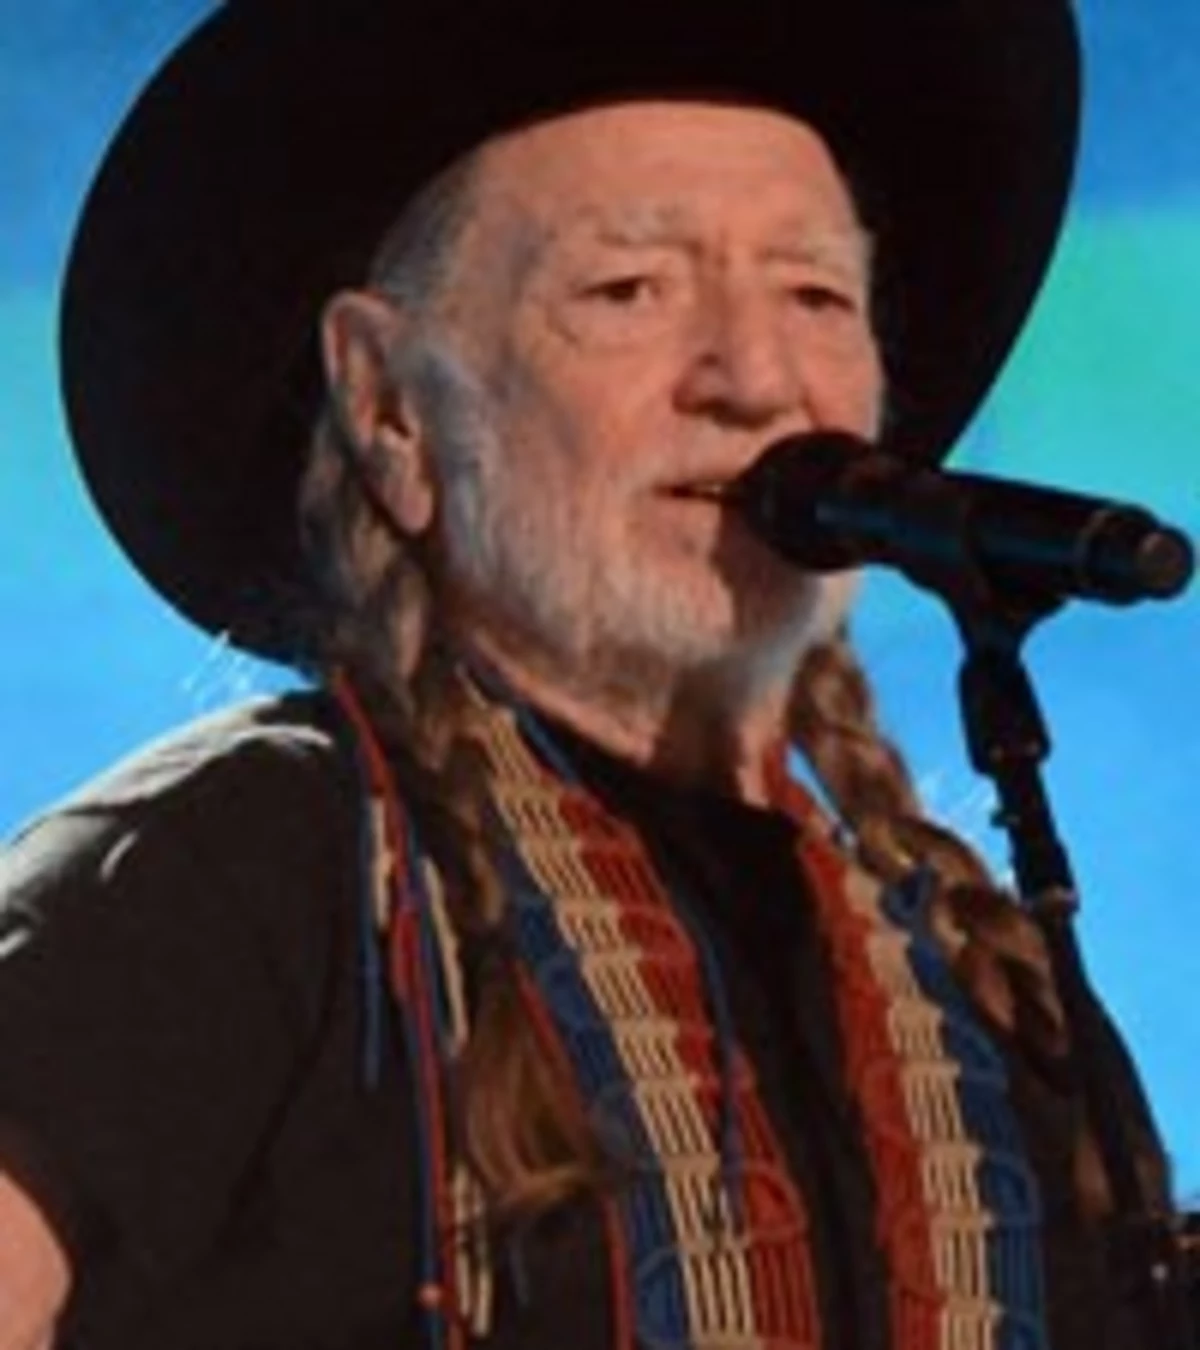 Willie Nelson Tour Resumes, Icon 'Fine' After Hospitalization